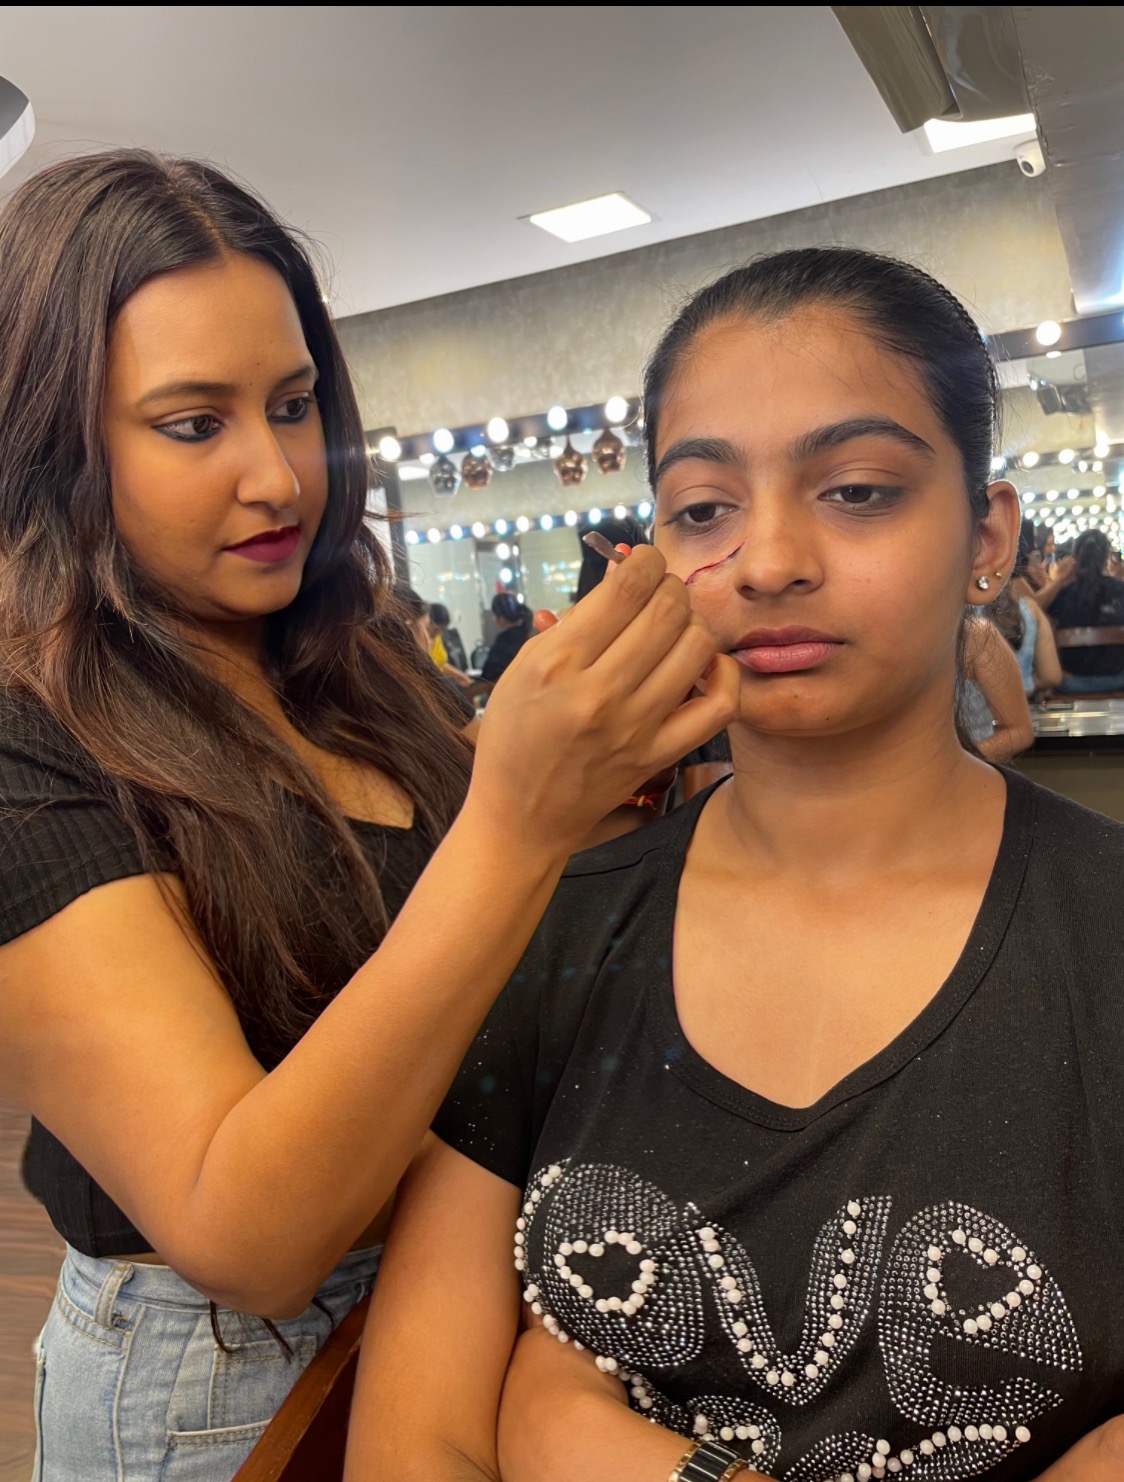 CHOOSE THE BEST MAKE-UP ACADEMY FOR YOUR PROFESSIONAL MAKE-UP COURSE